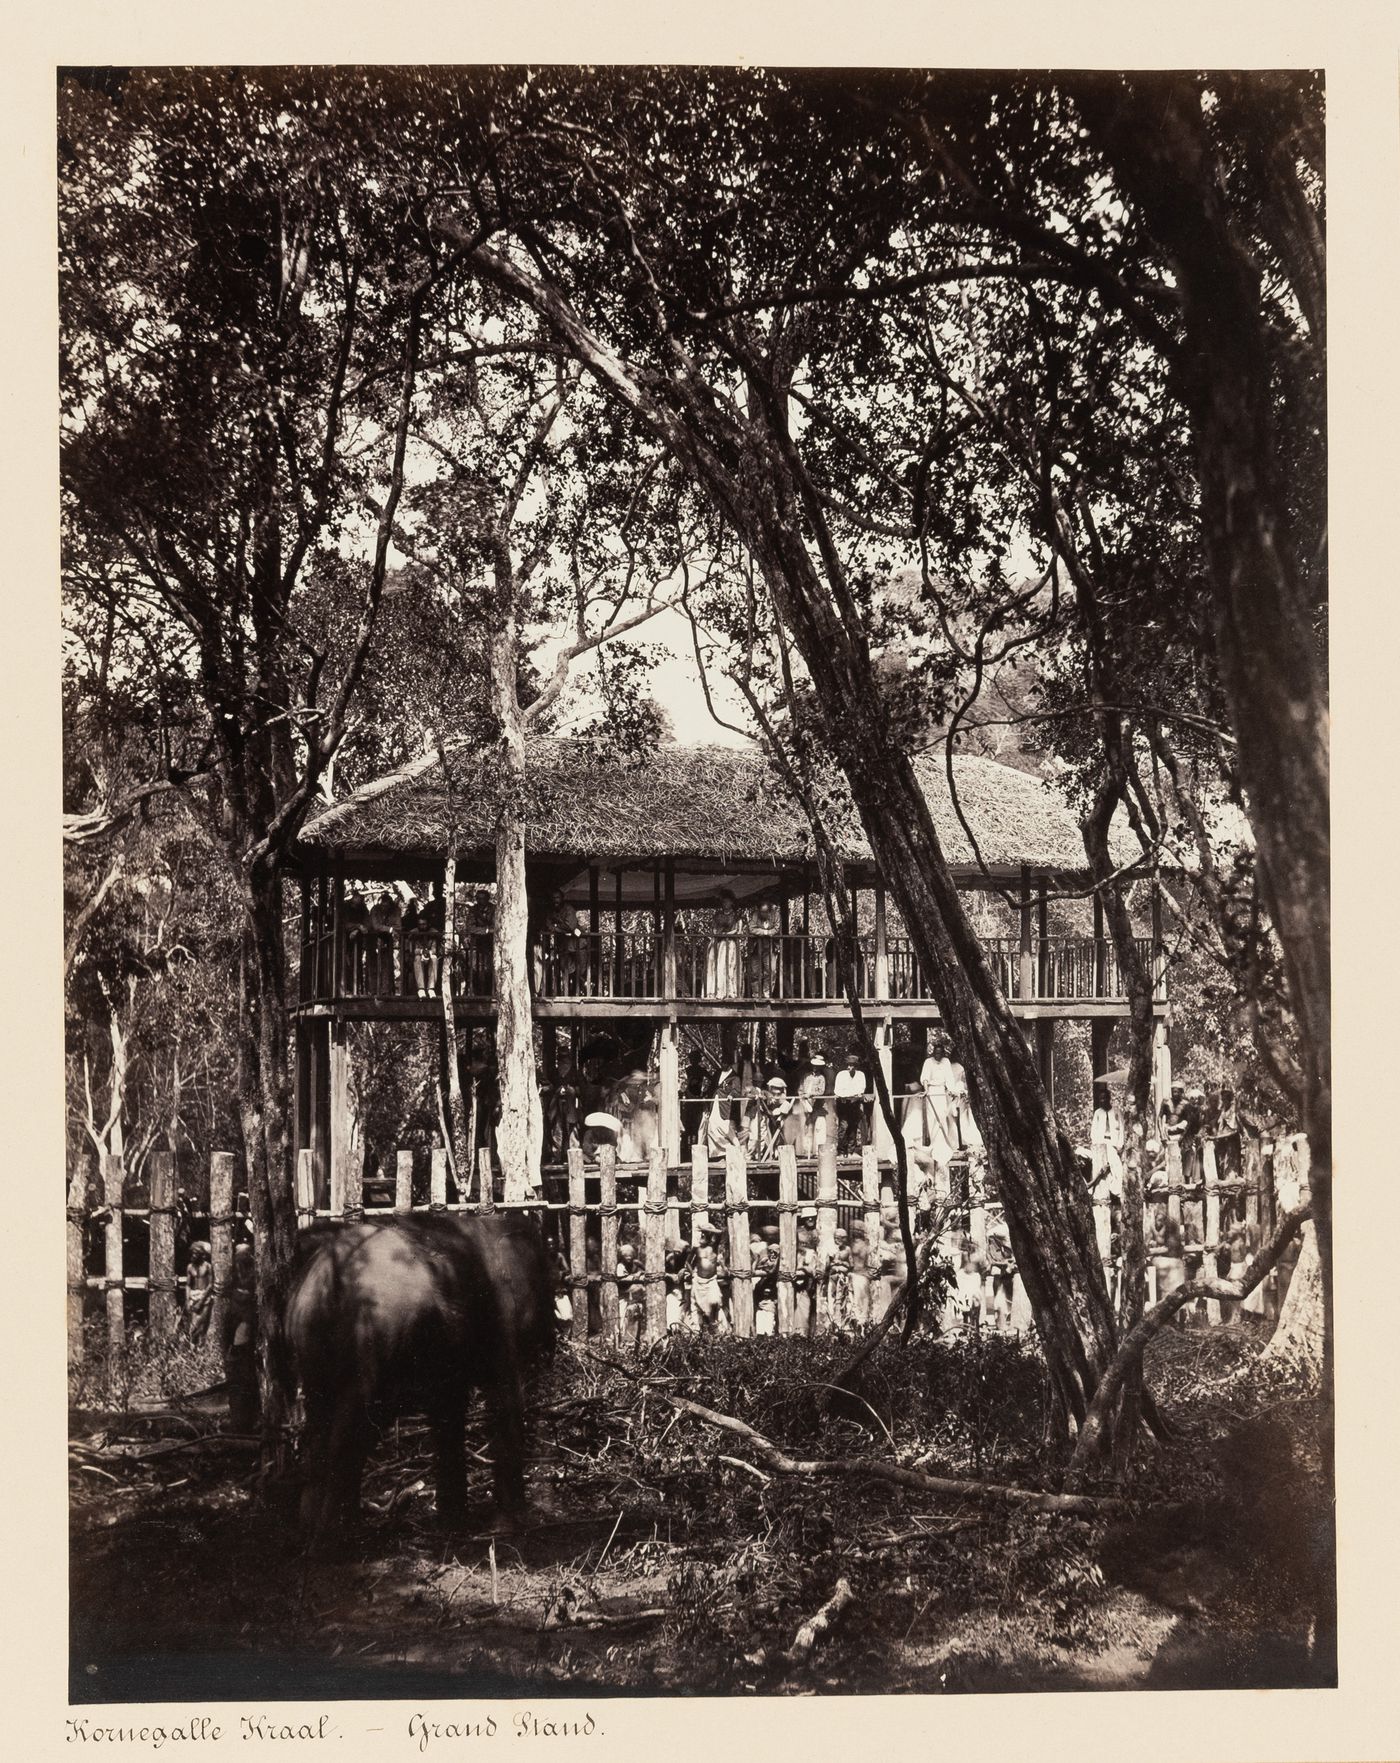 View of the grandstand and kraal with an elephant in the foreground, Kornegalle, Ceylon (now Sri Lanka)